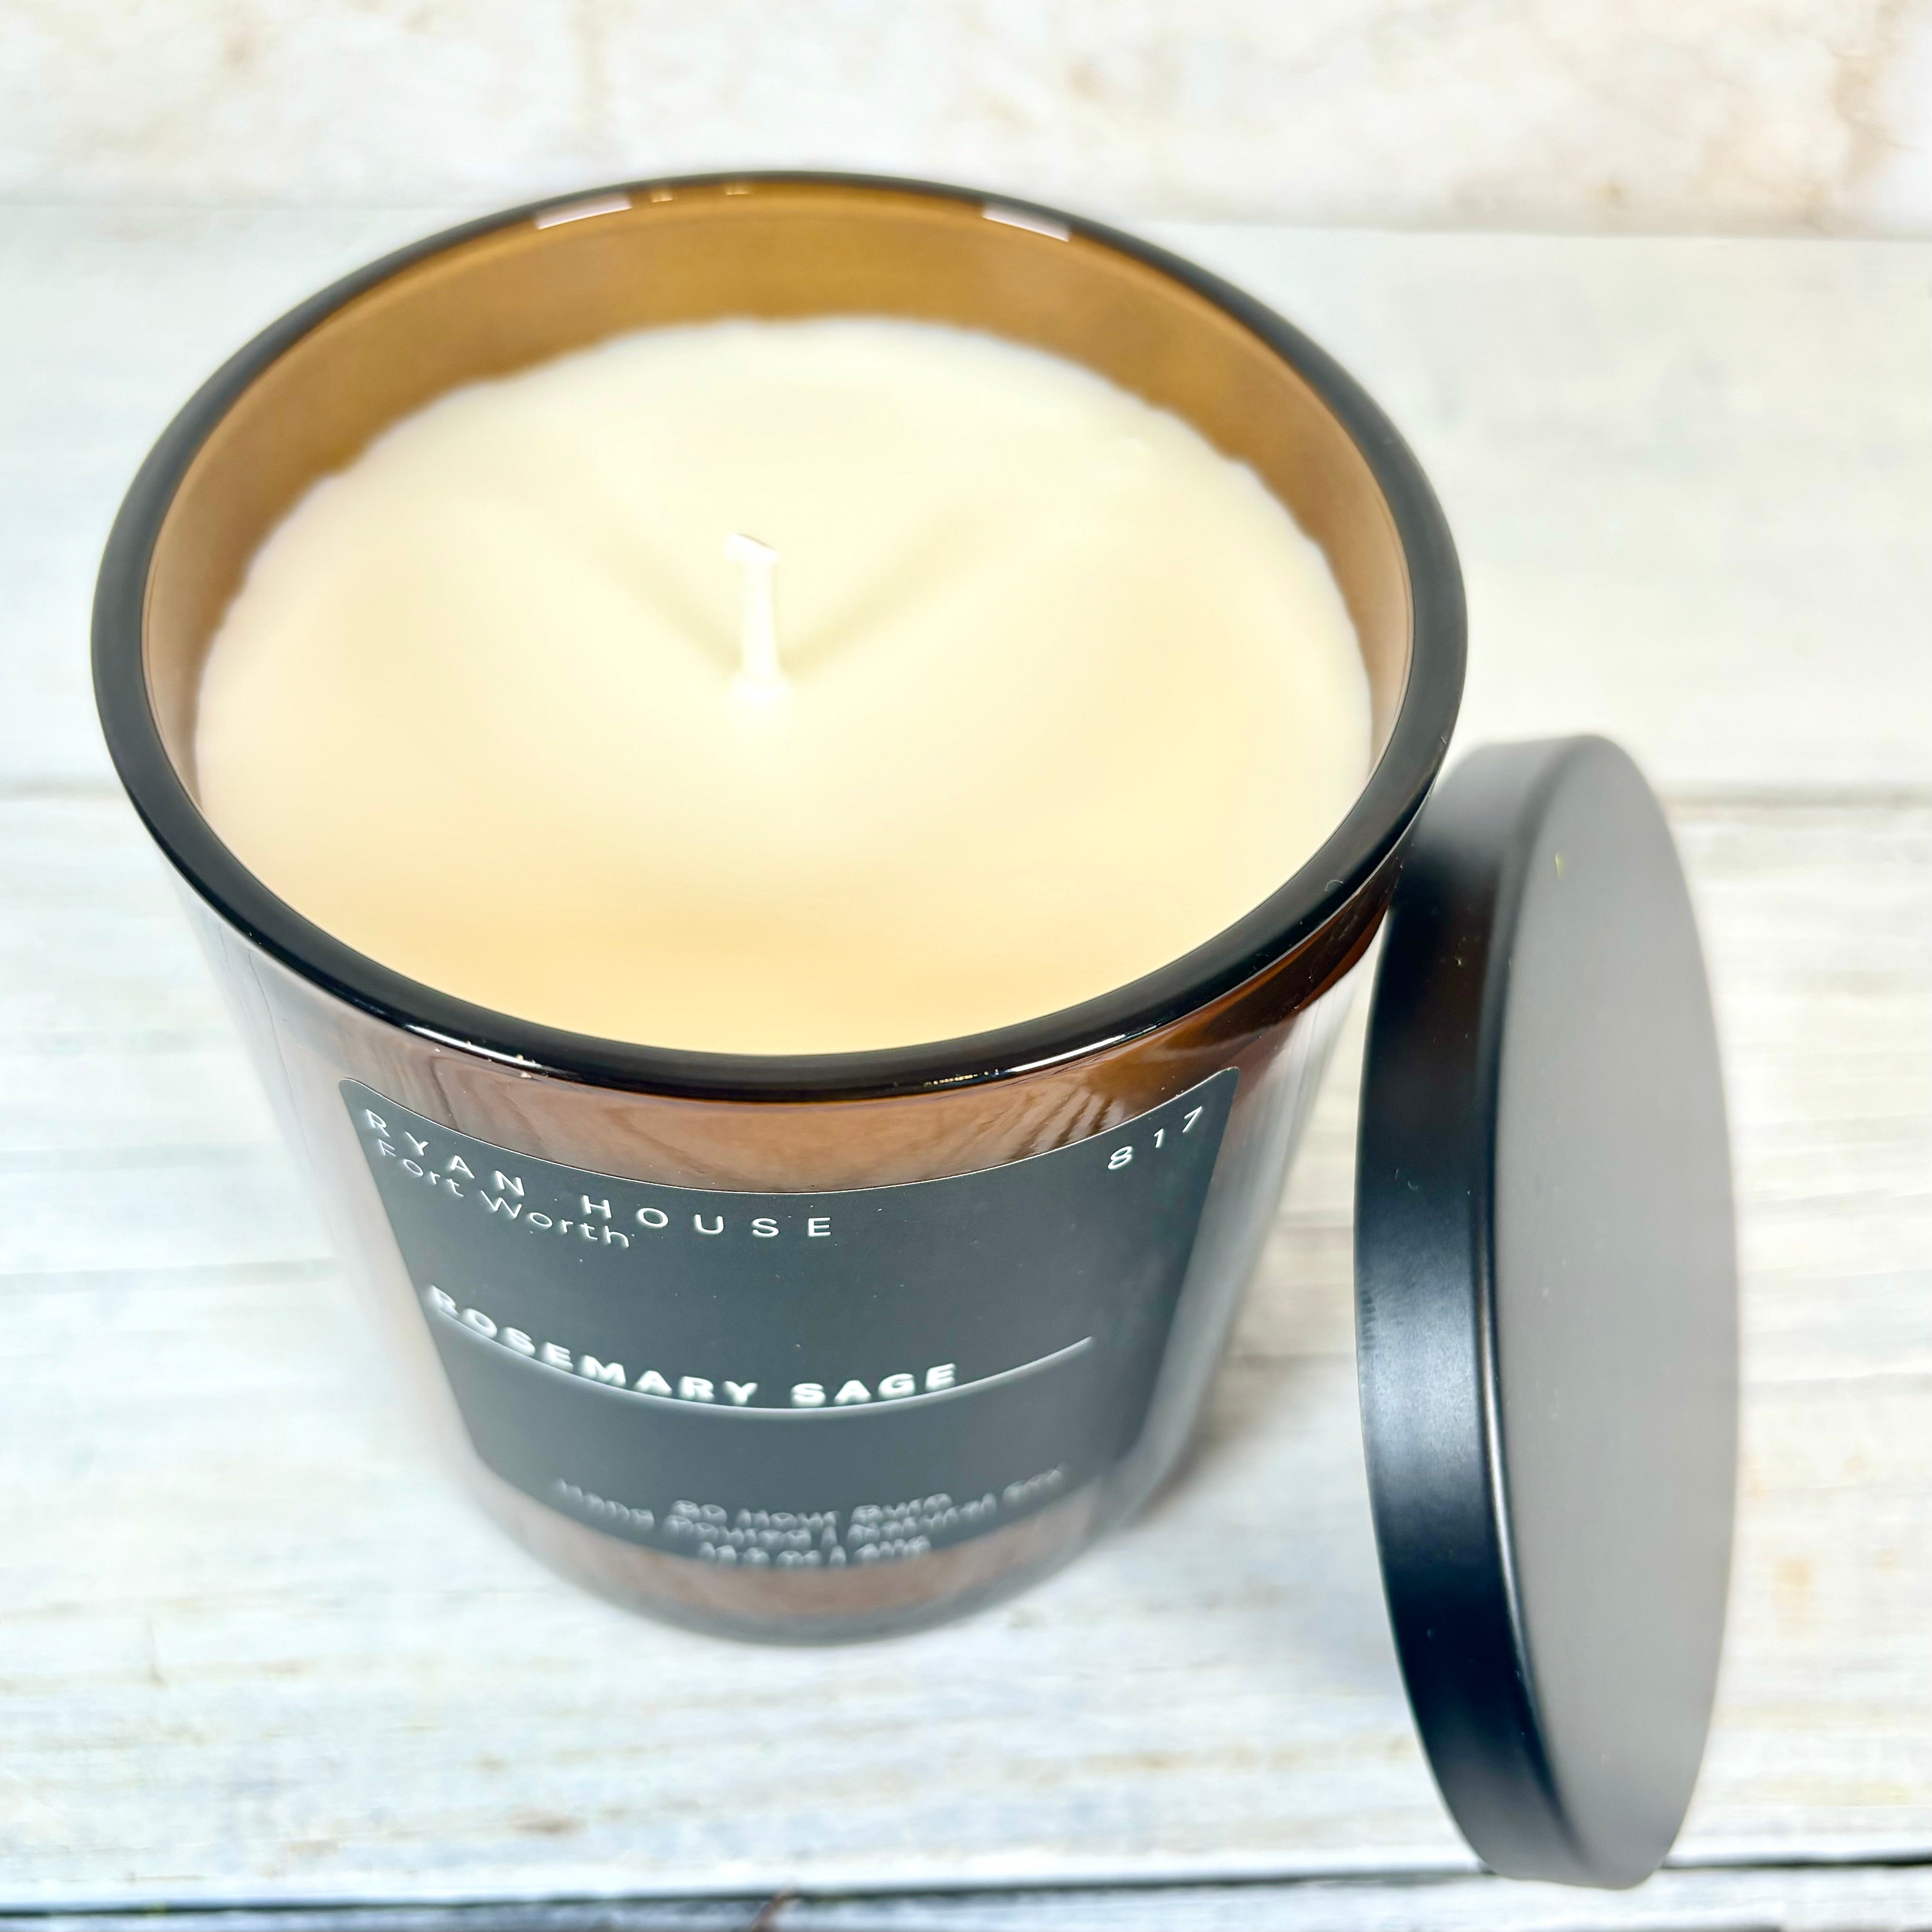 Hand Poured Rosemary Sage Candle